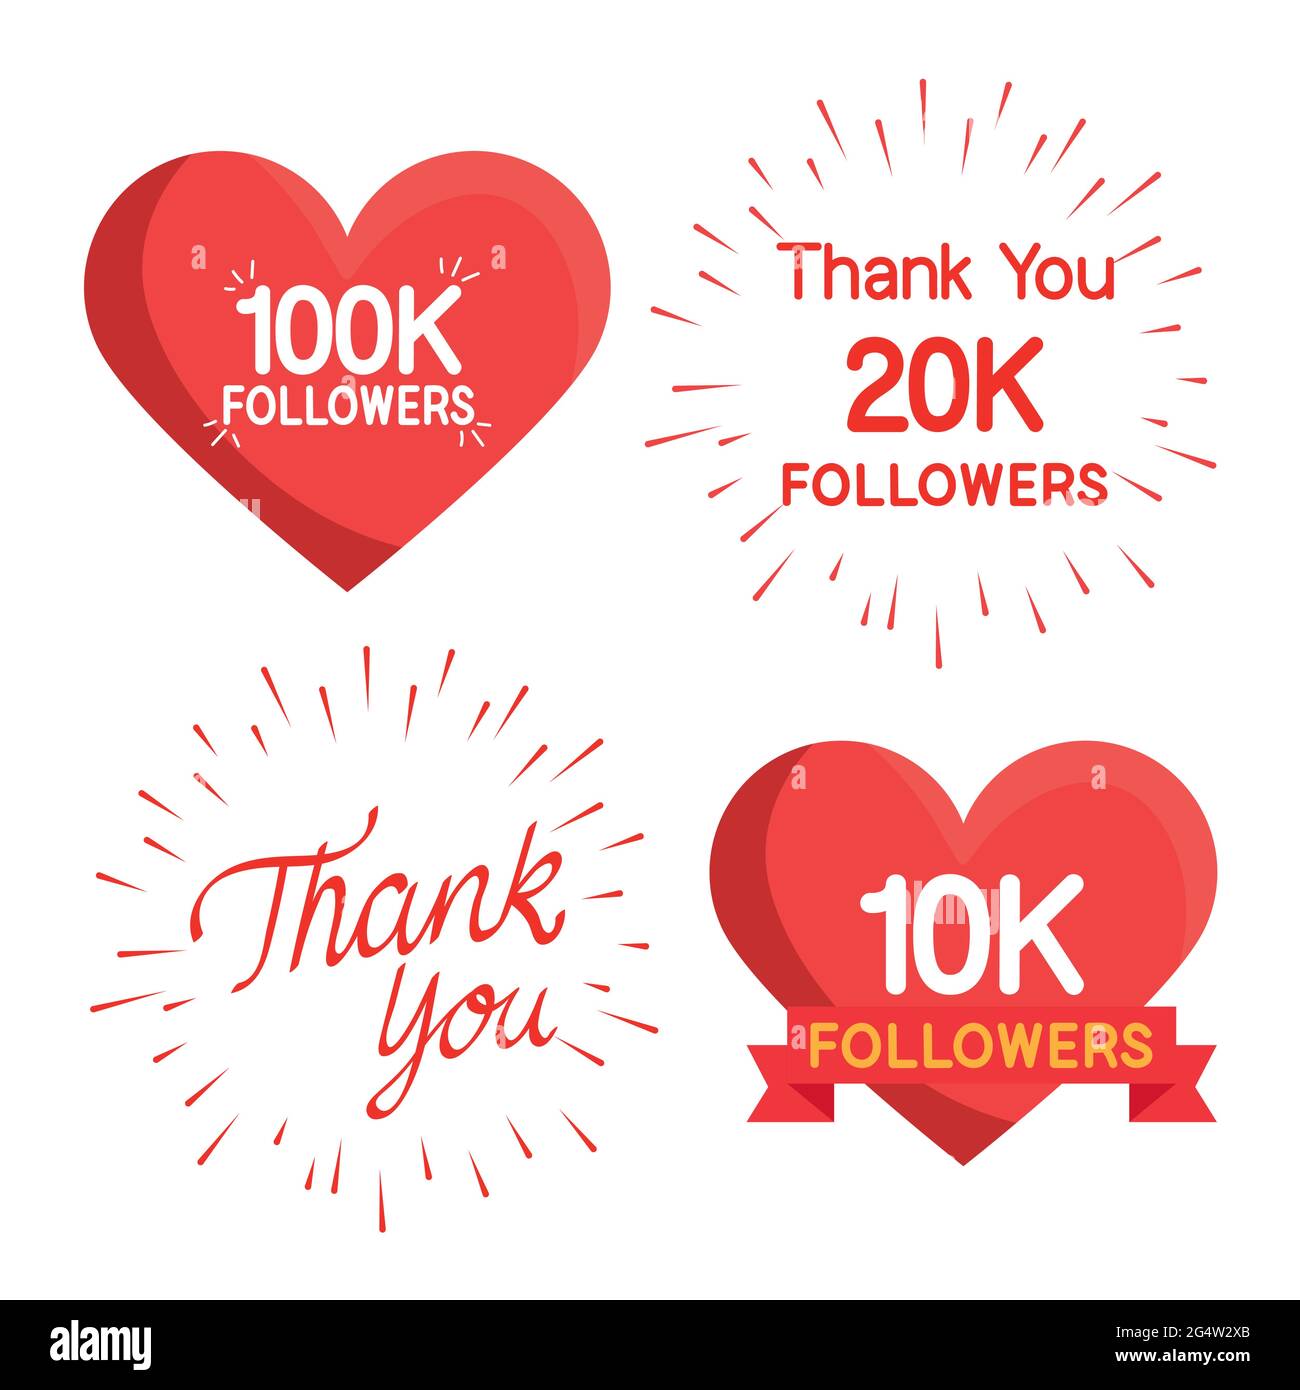 100,000 Red heart Vector Images